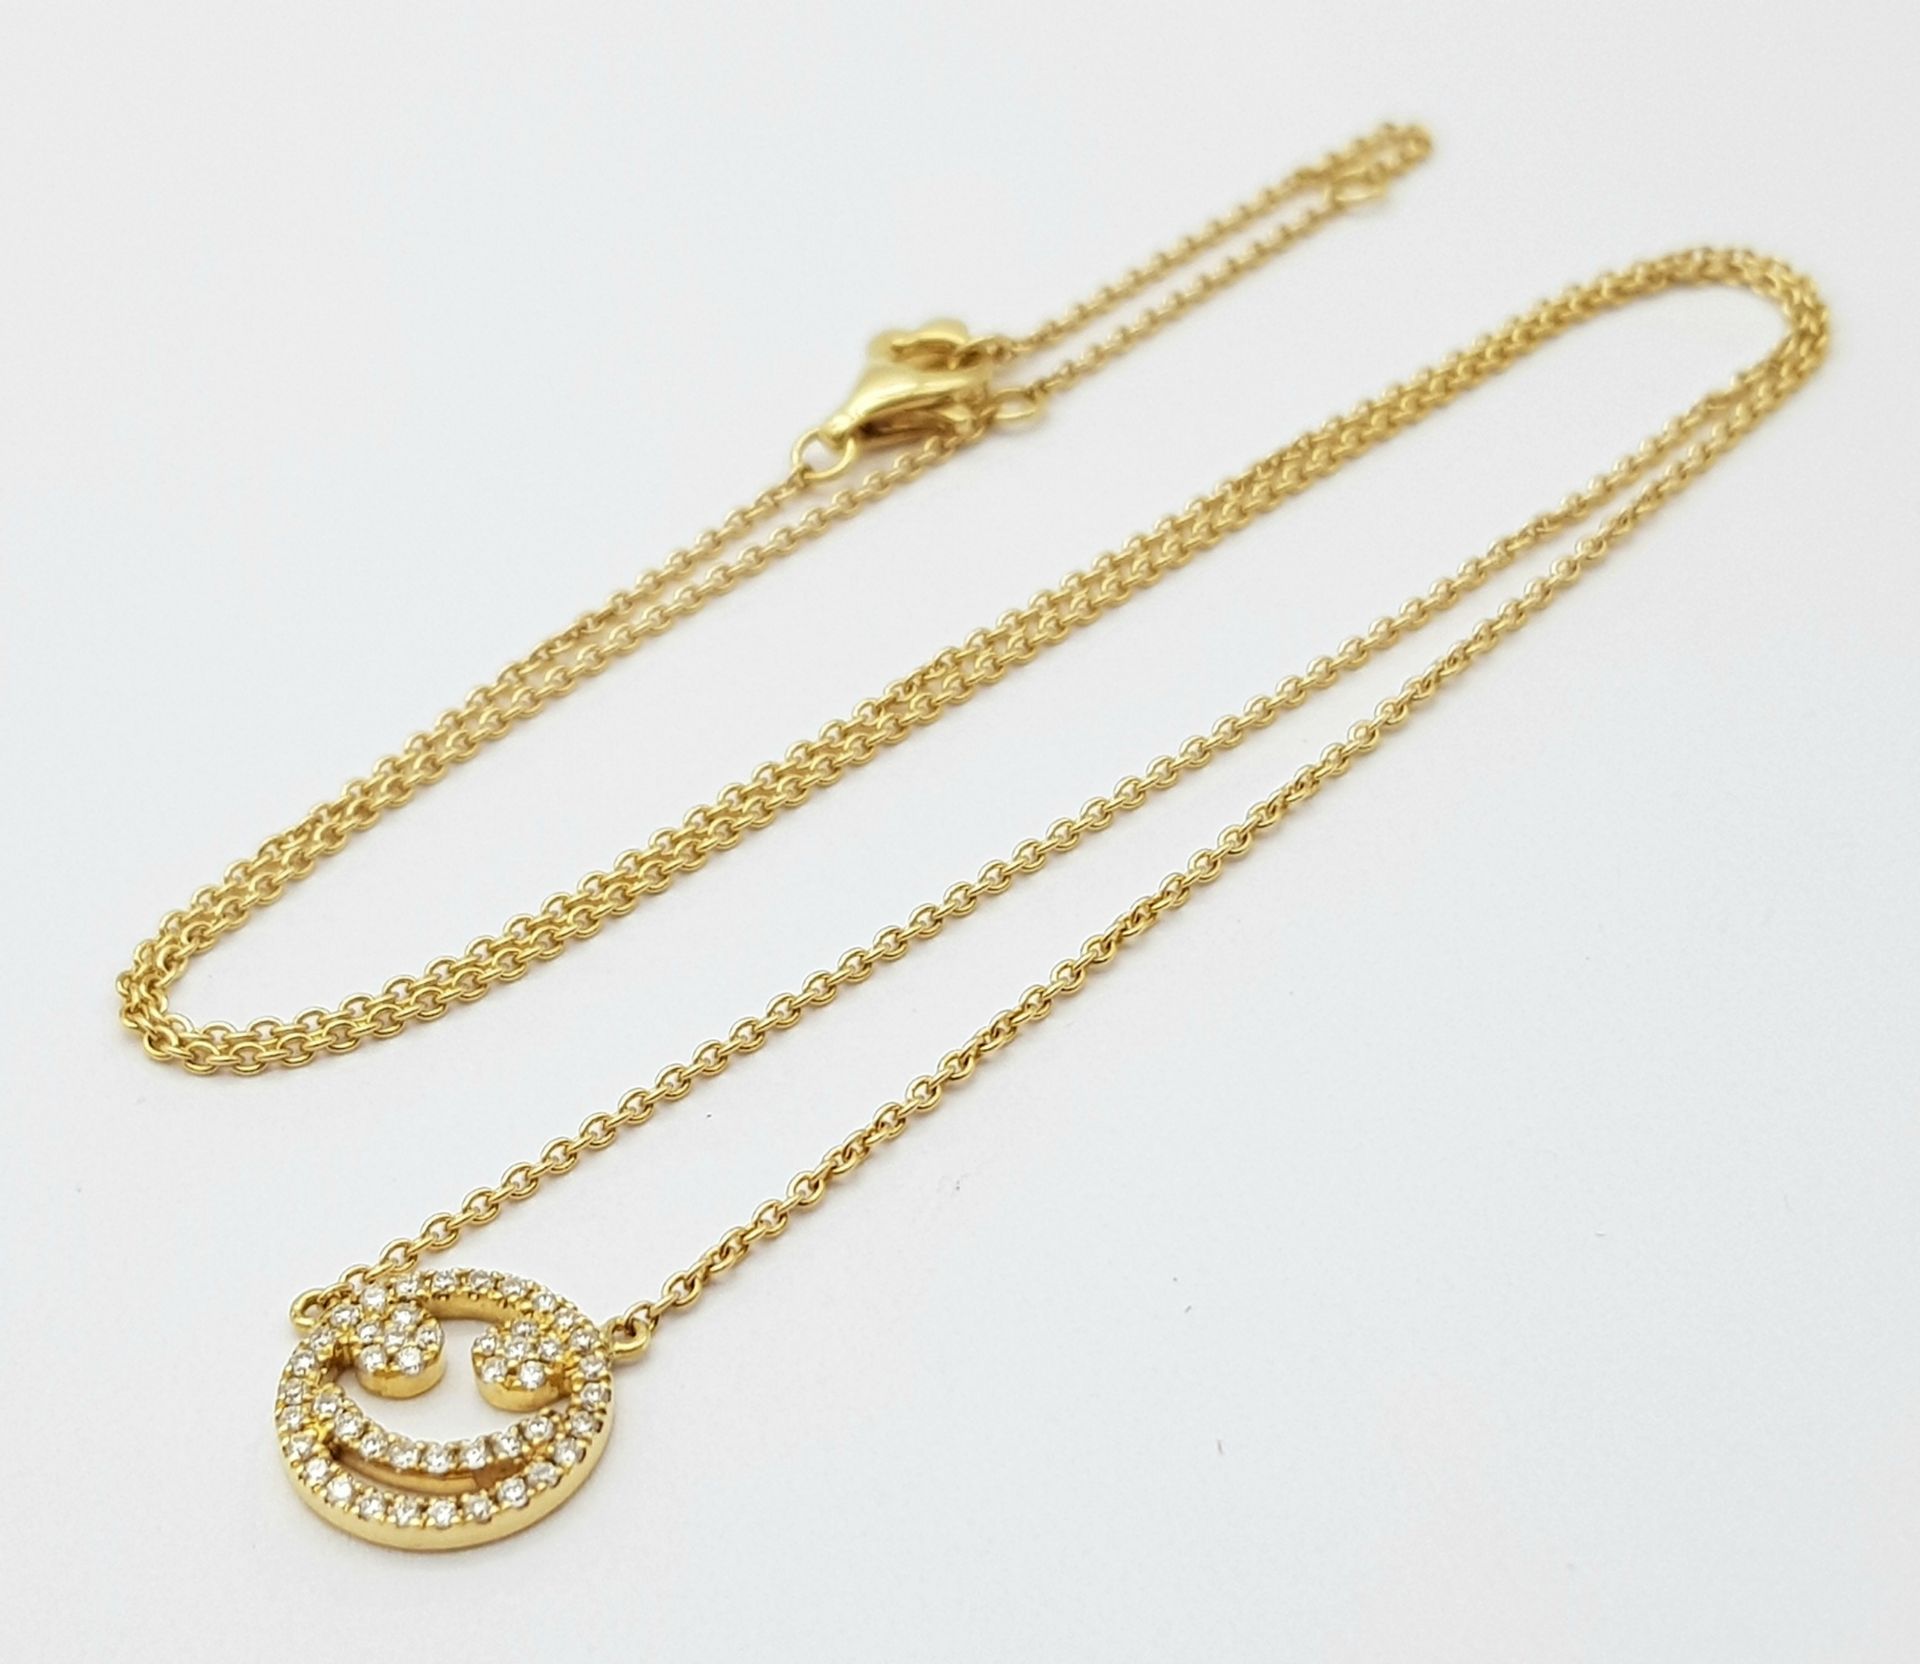 An 18K Gold Diamond Smiley Face Pendant on an 18K Yellow Gold Disappearing Necklace. 1cm diameter